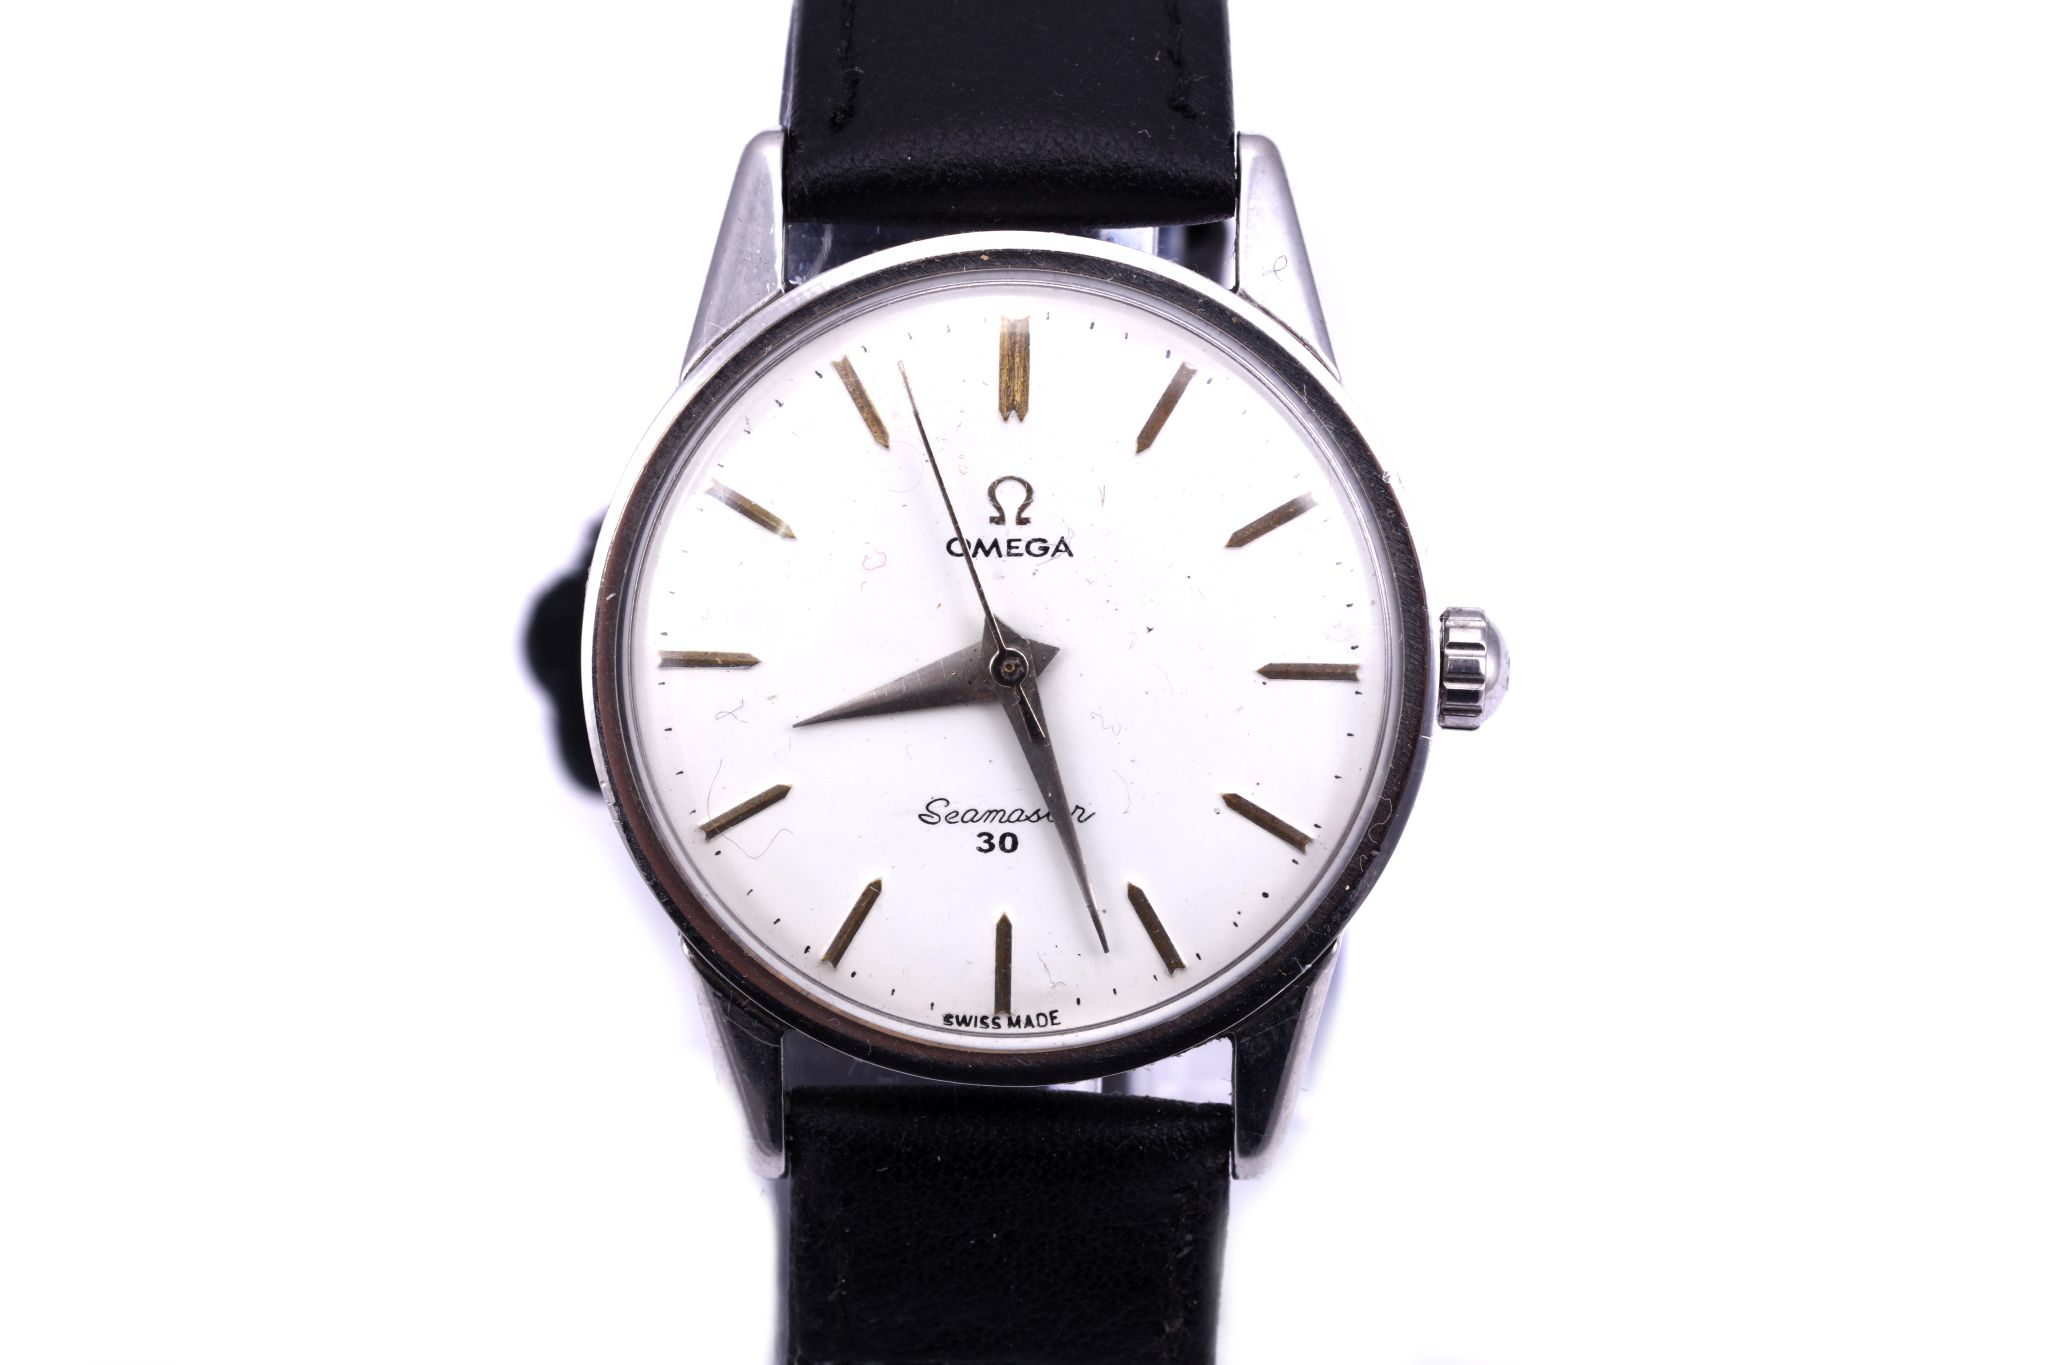 GENTS OMEGA SEAMASTER 30 WRISTWATCH  A gents c.1960's stainless steel Omega Seamaster 30 wristwatch, - Image 2 of 4